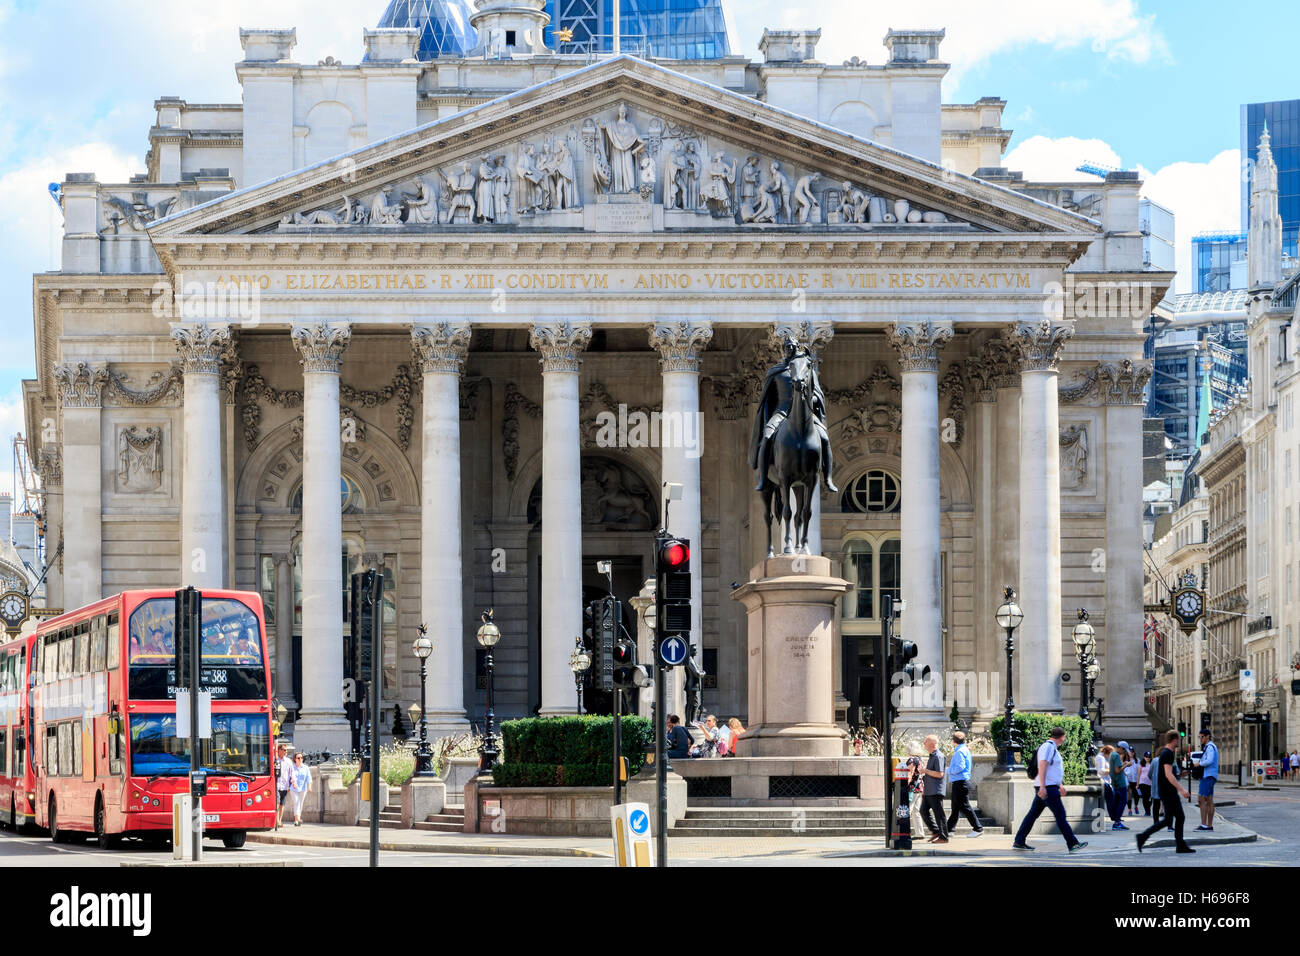 London, UK - August 06, 2016 - Traffic and walking people in front of the Royal Exchange Stock Photo